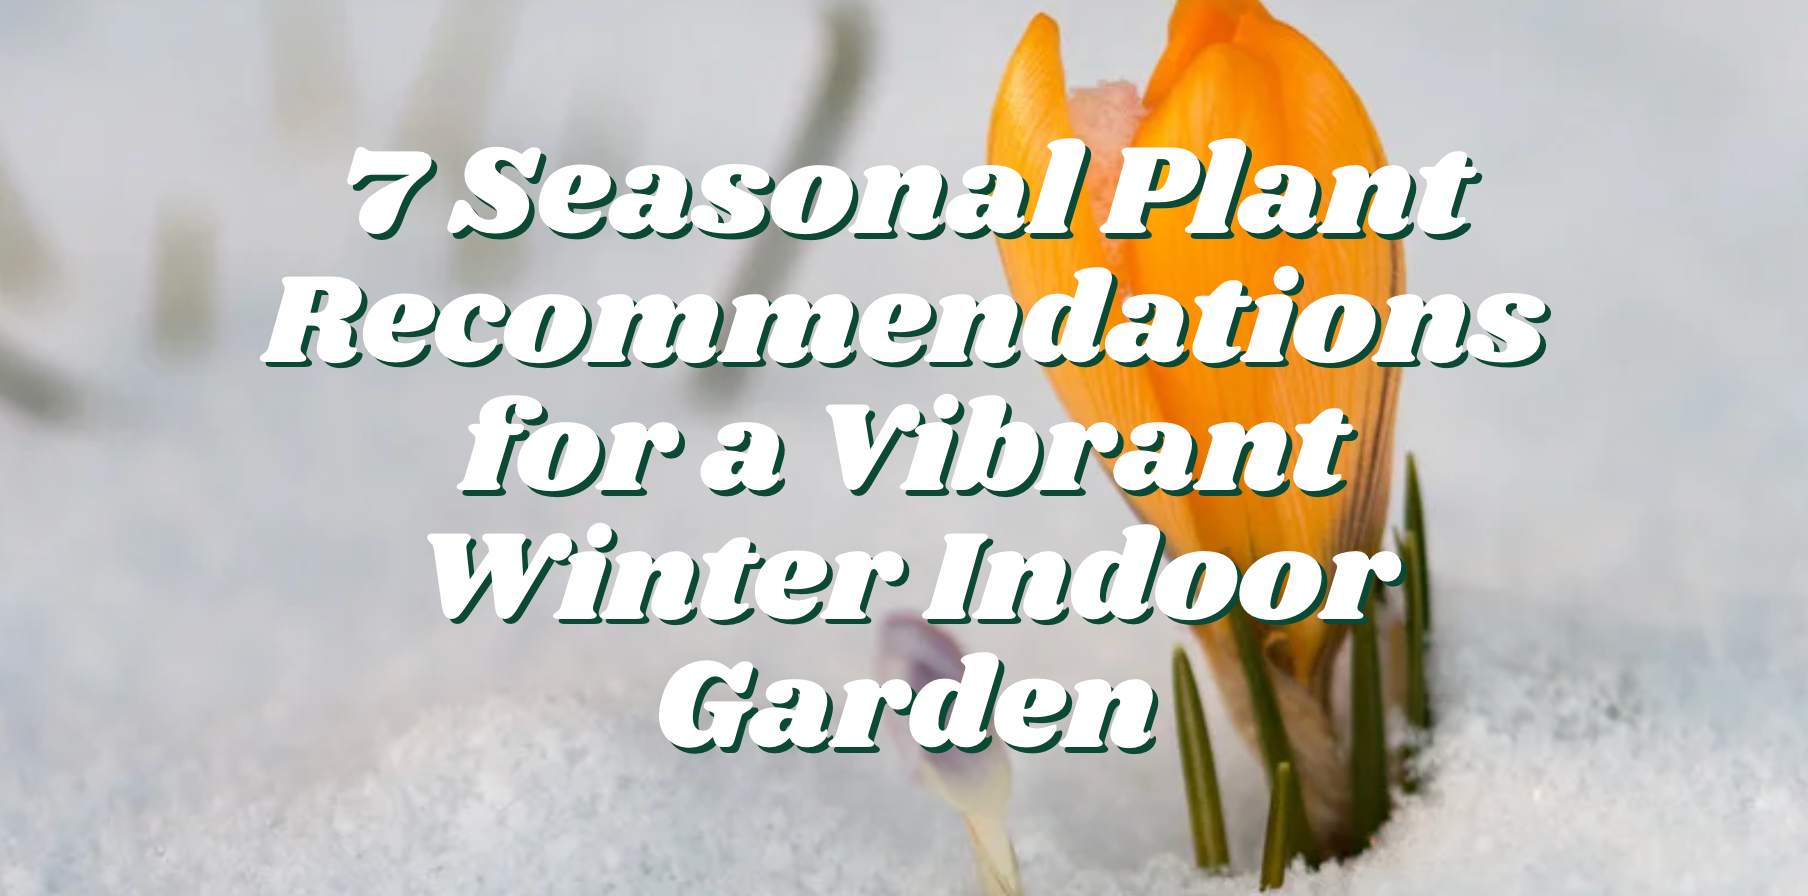 7 Seasonal Plant Recommendations for a Vibrant Winter Indoor Garden